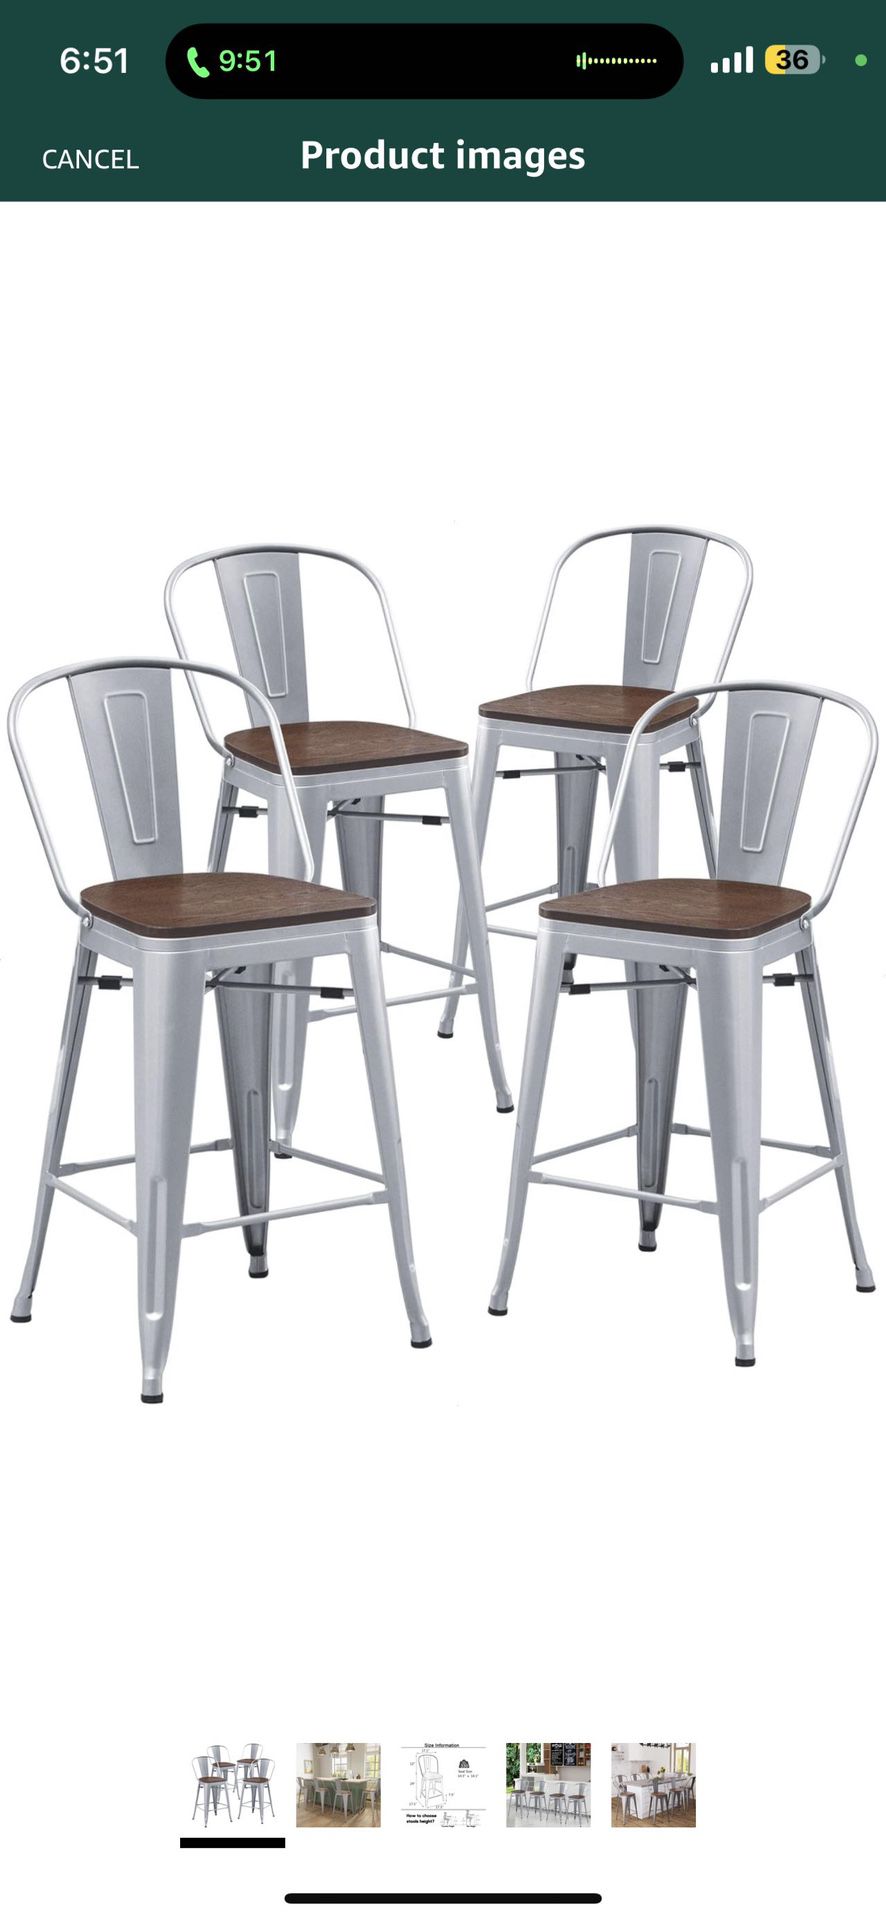 Metal Bar Stools Set of 4,24 inch Barstools Counter Height Bar Stools with Backs Farmhouse Bar Stools with Larger seat High Back Kitchen Dining Chairs